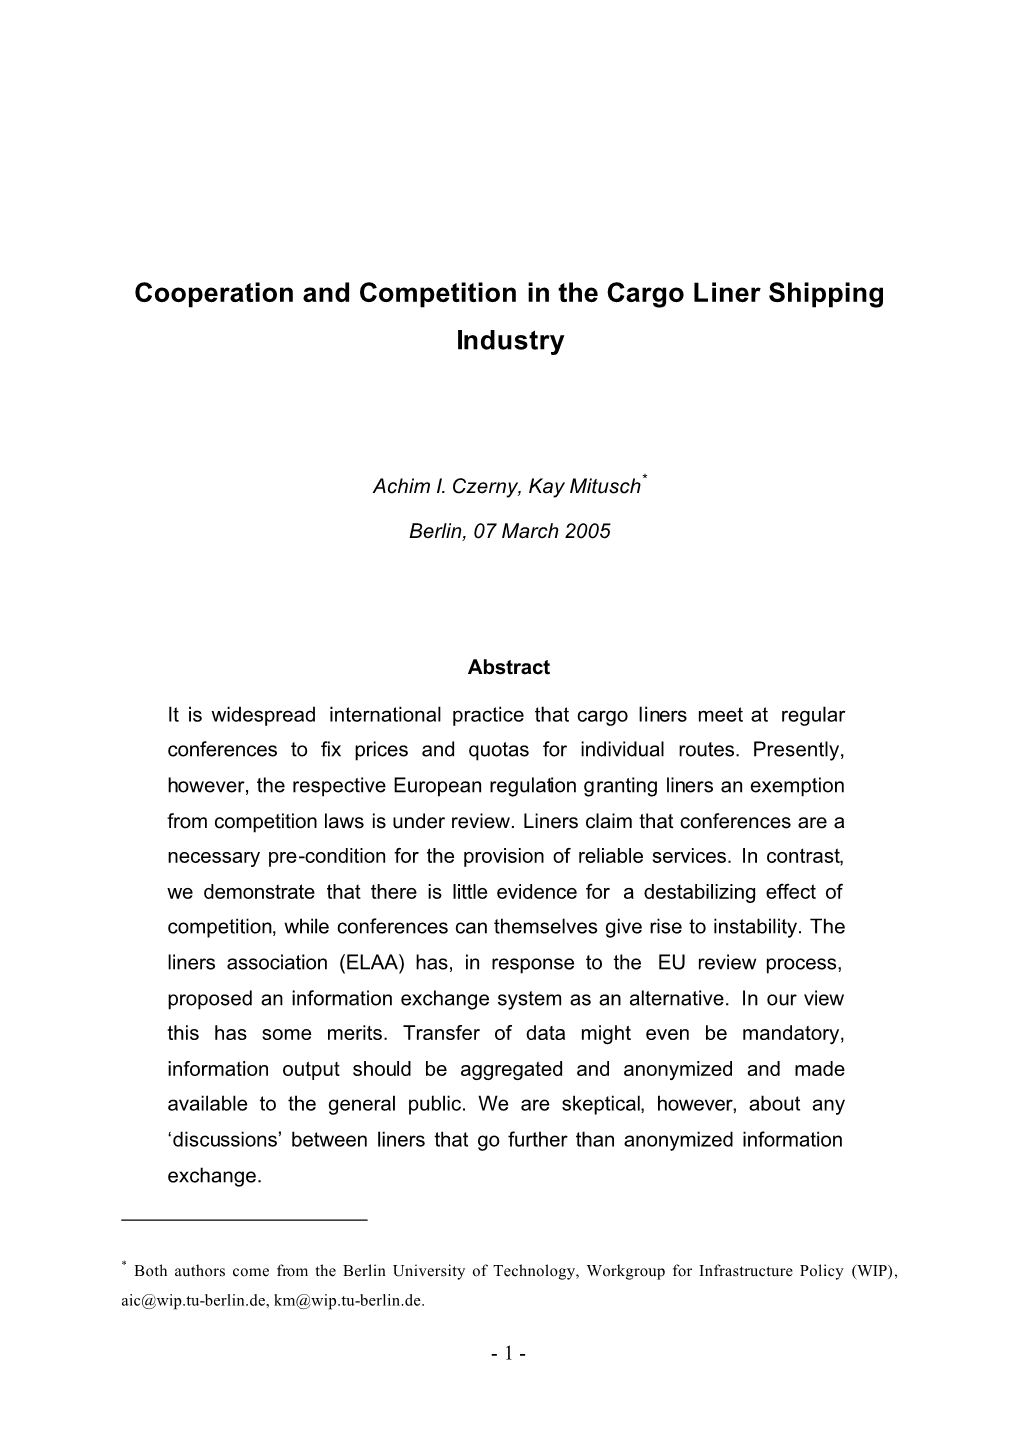 Cooperation and Competition in the Cargo Liner Shipping Industry